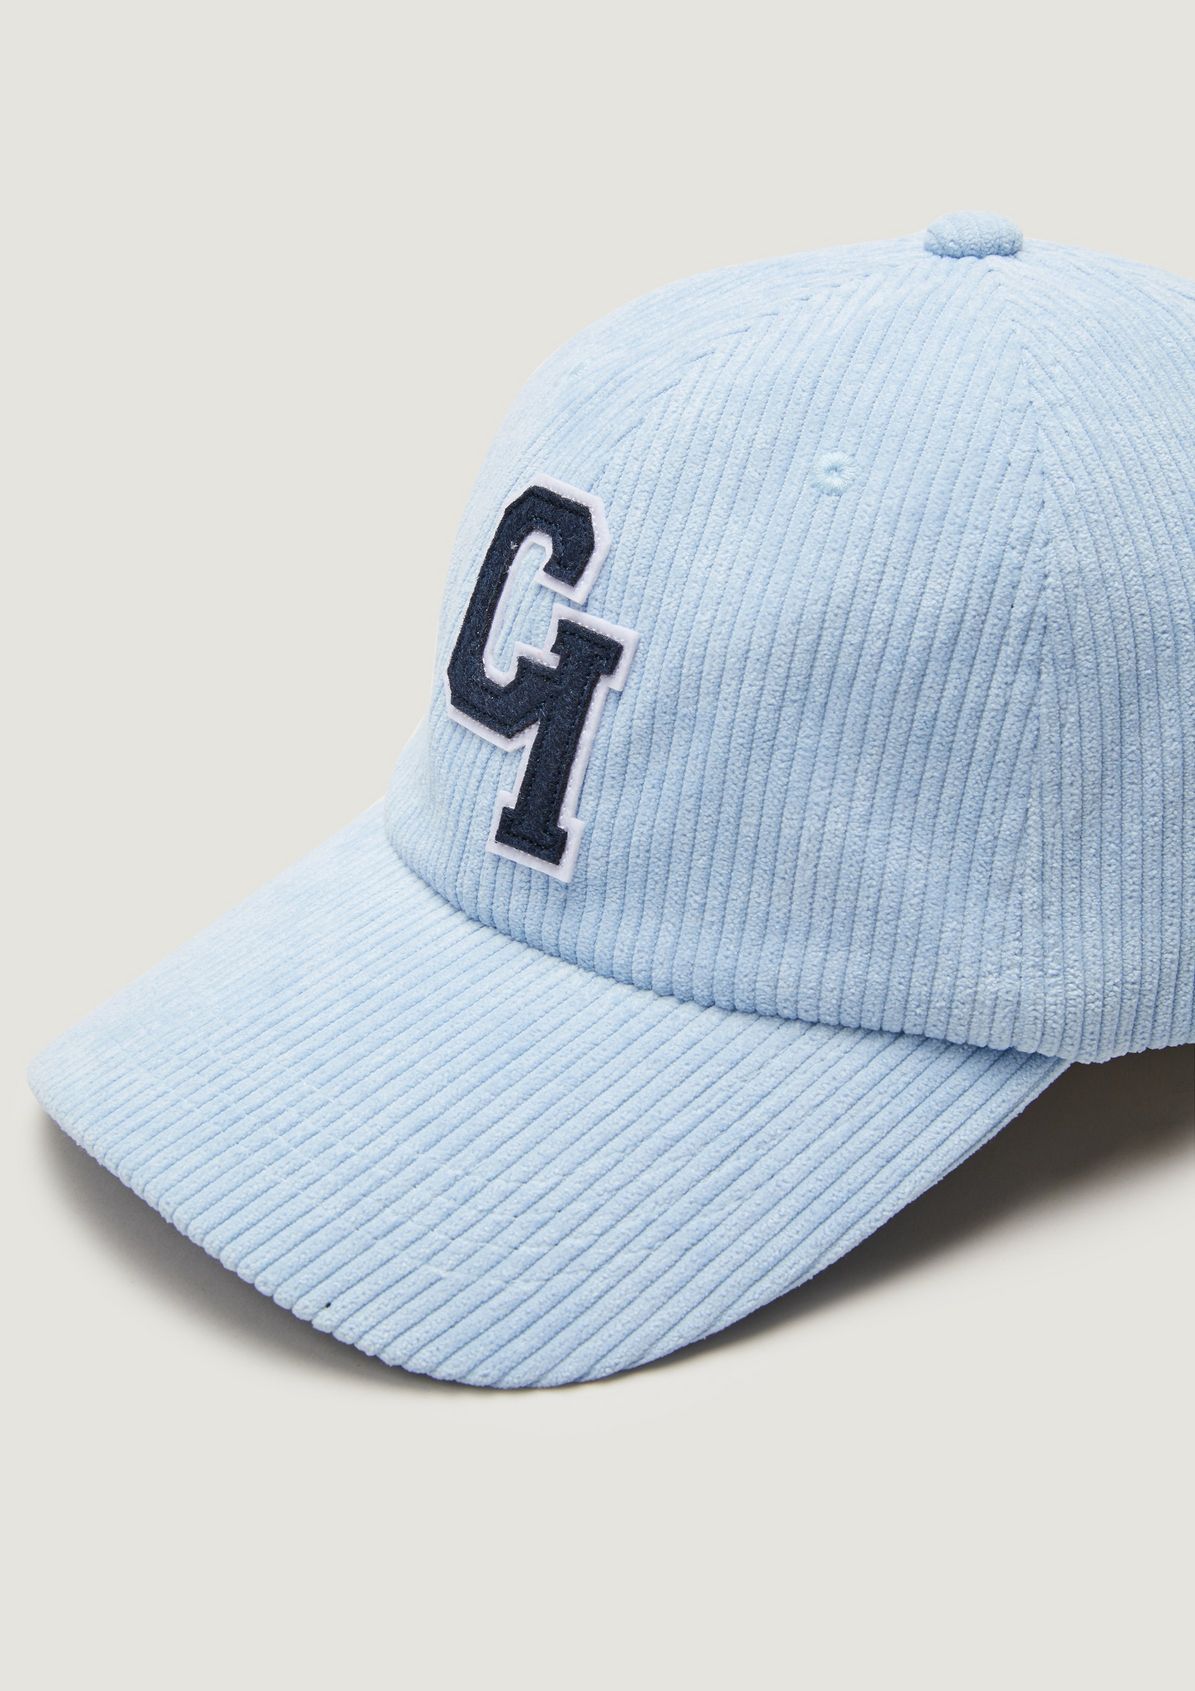 Corduroy cap in a college style from comma